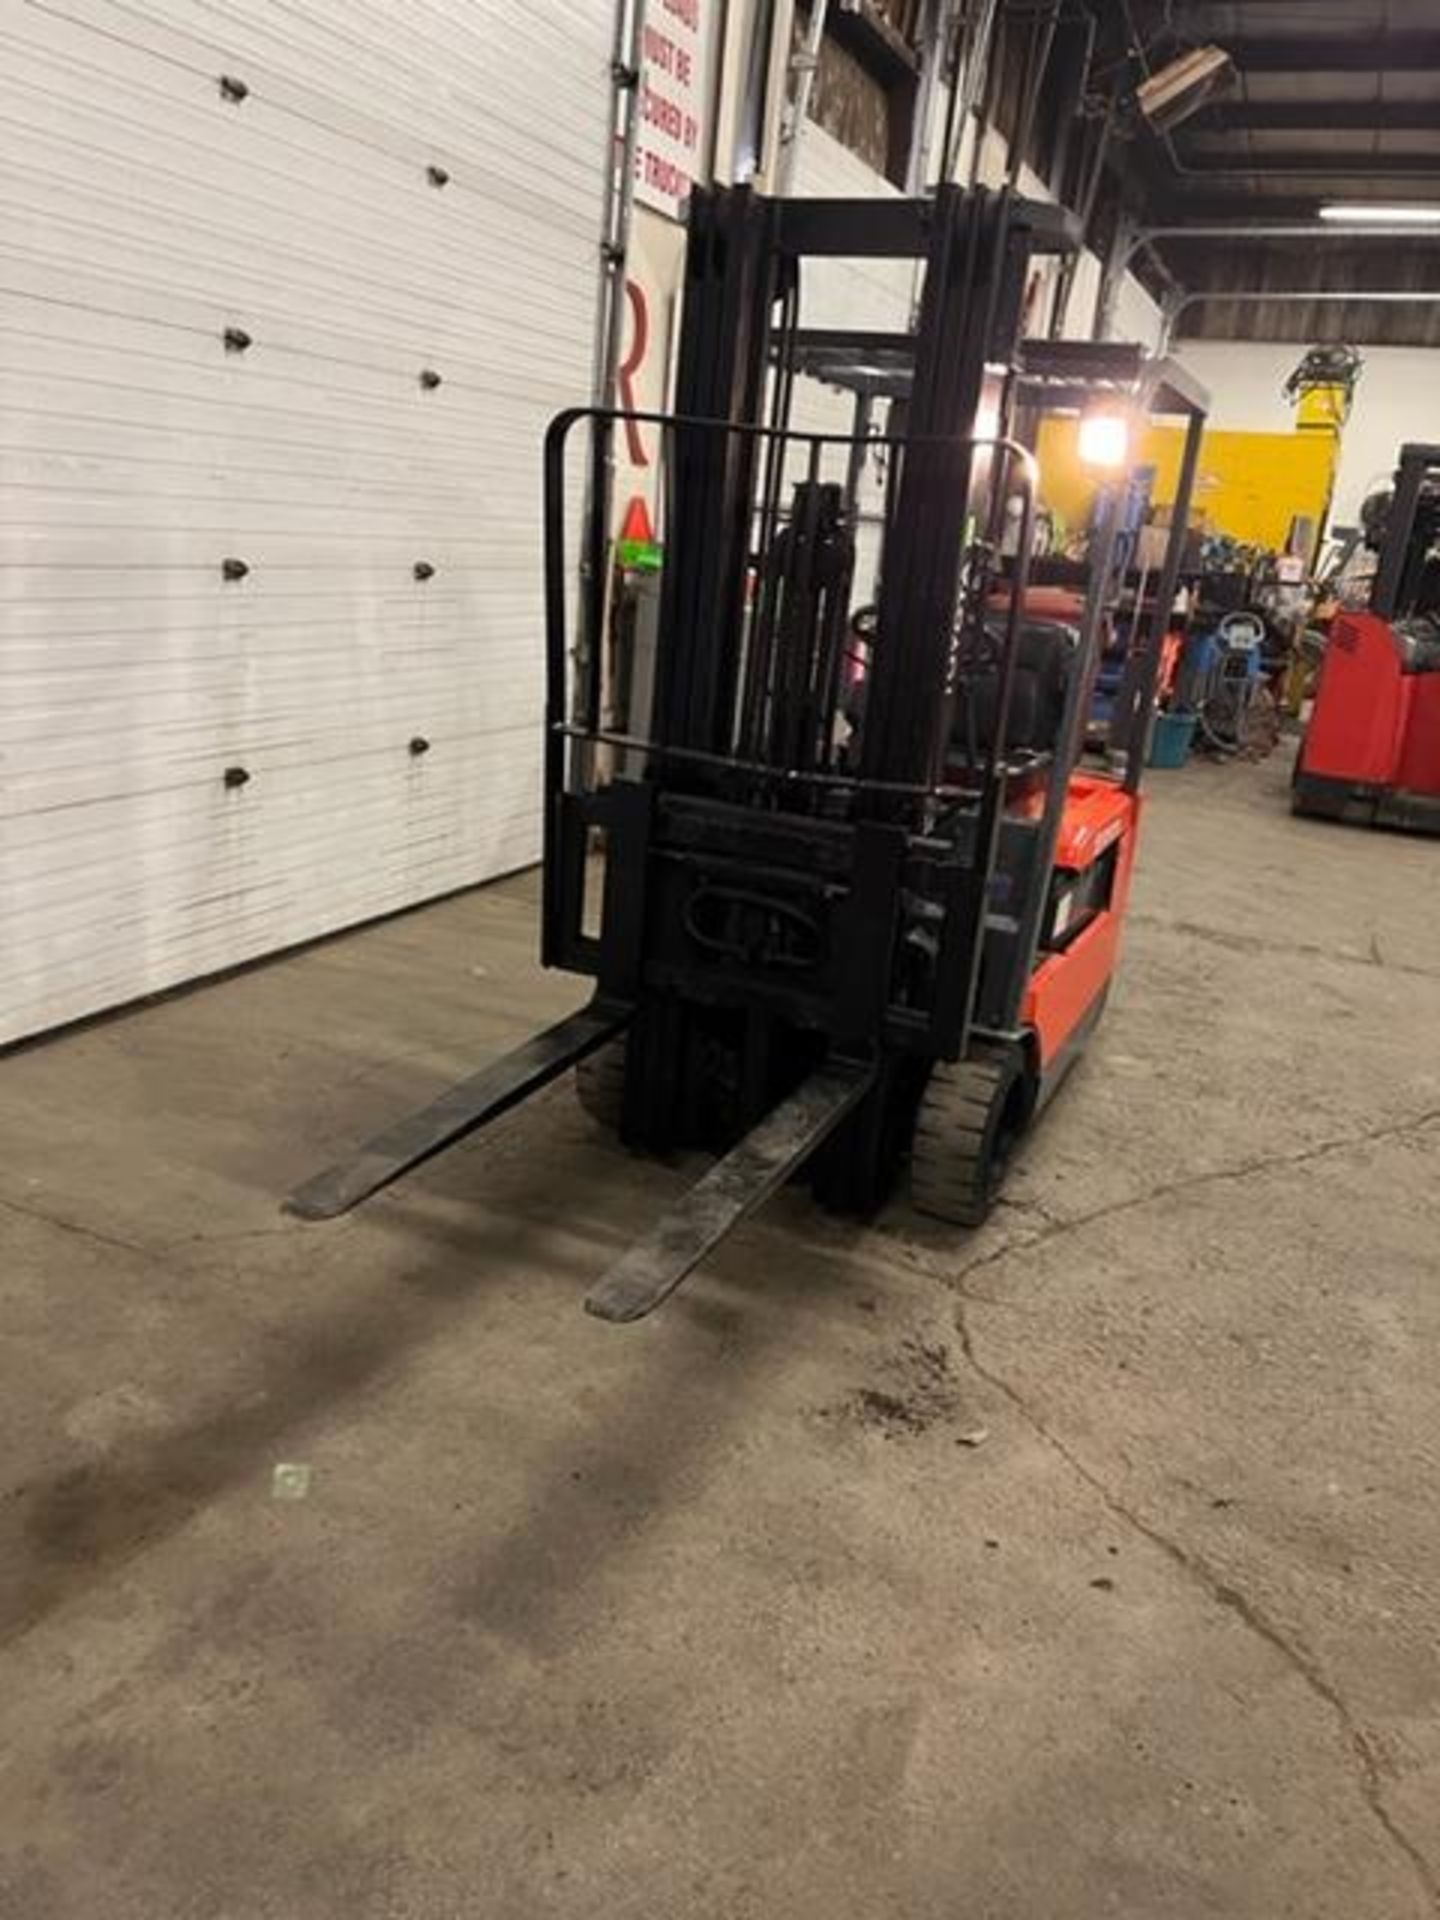 FREE CUSTOMS - NICE Toyota 3,000lbs Capacity 3-wheel Forklift Electric with 3-stage mast with - Image 2 of 4